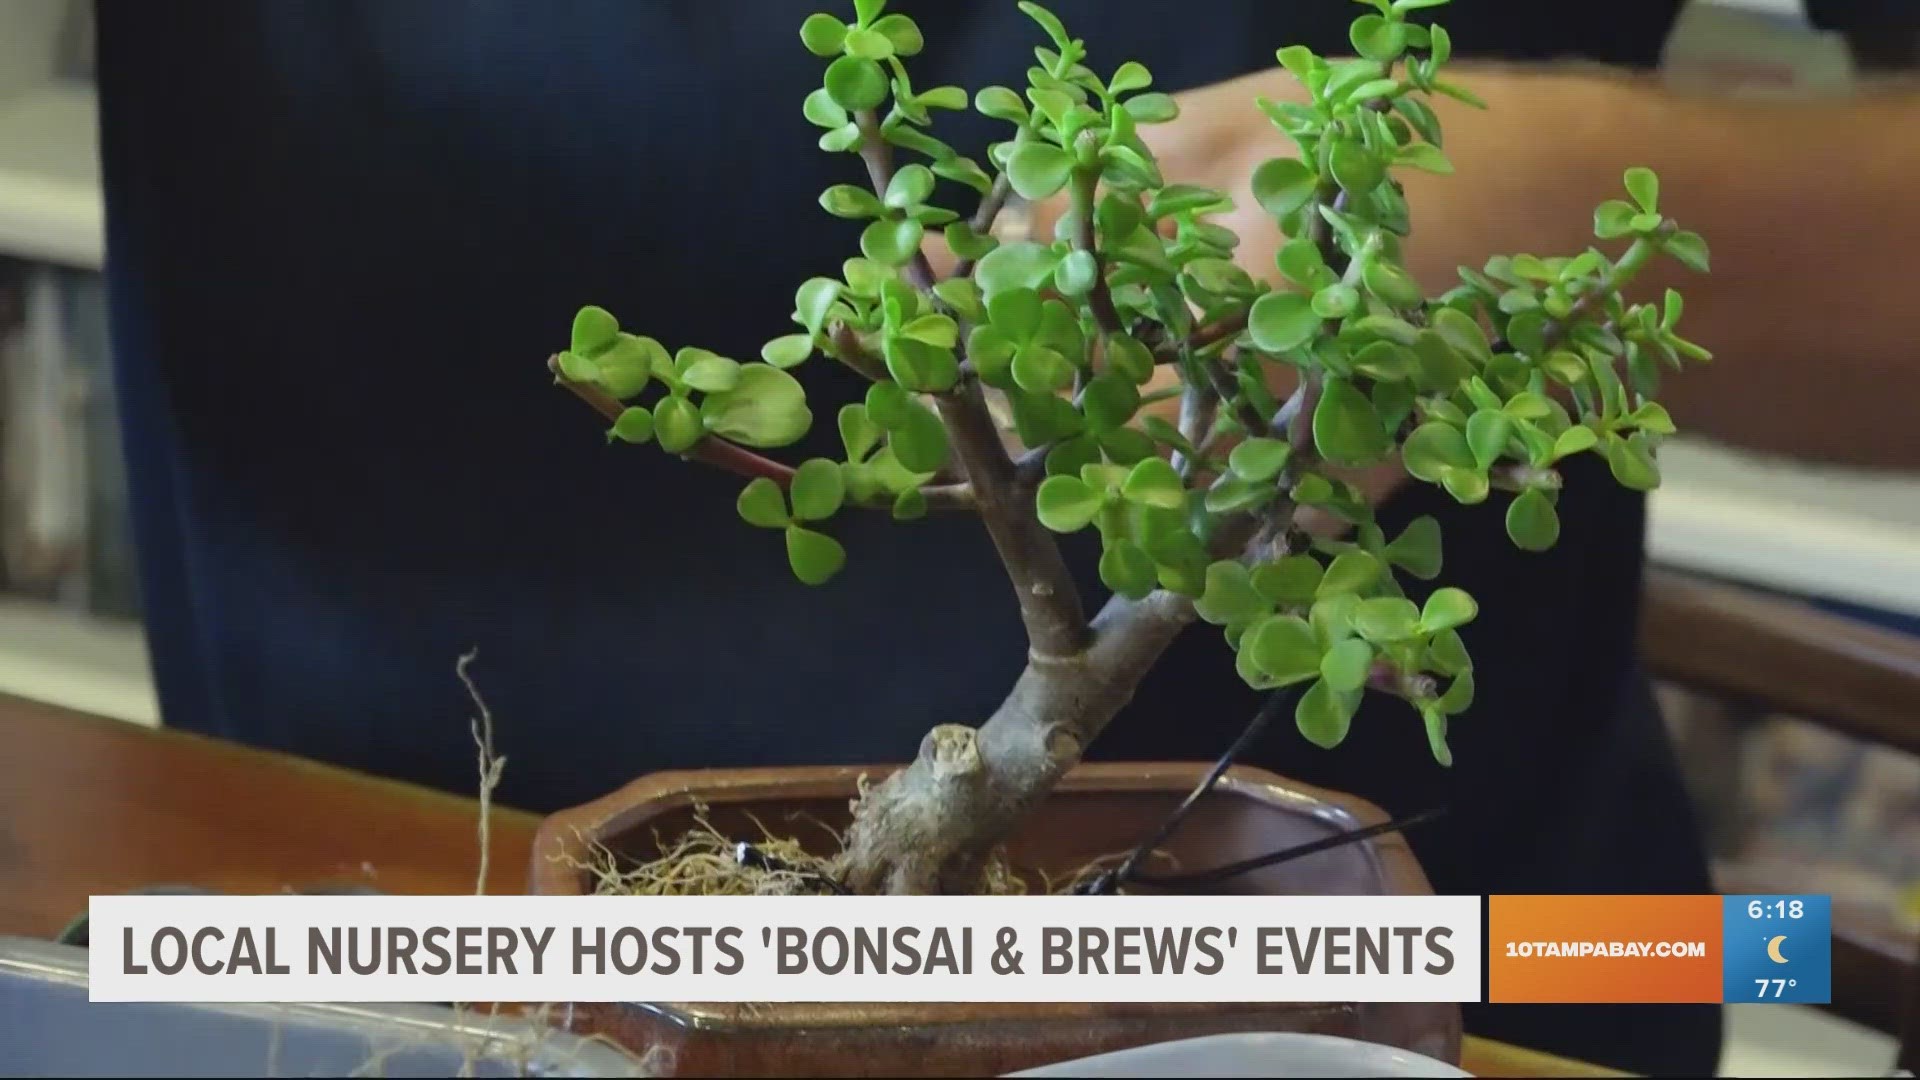 'Bonsai and Brews' allows visitors to experience the peaceful activity of bonsai tree potting with a beer in hand.